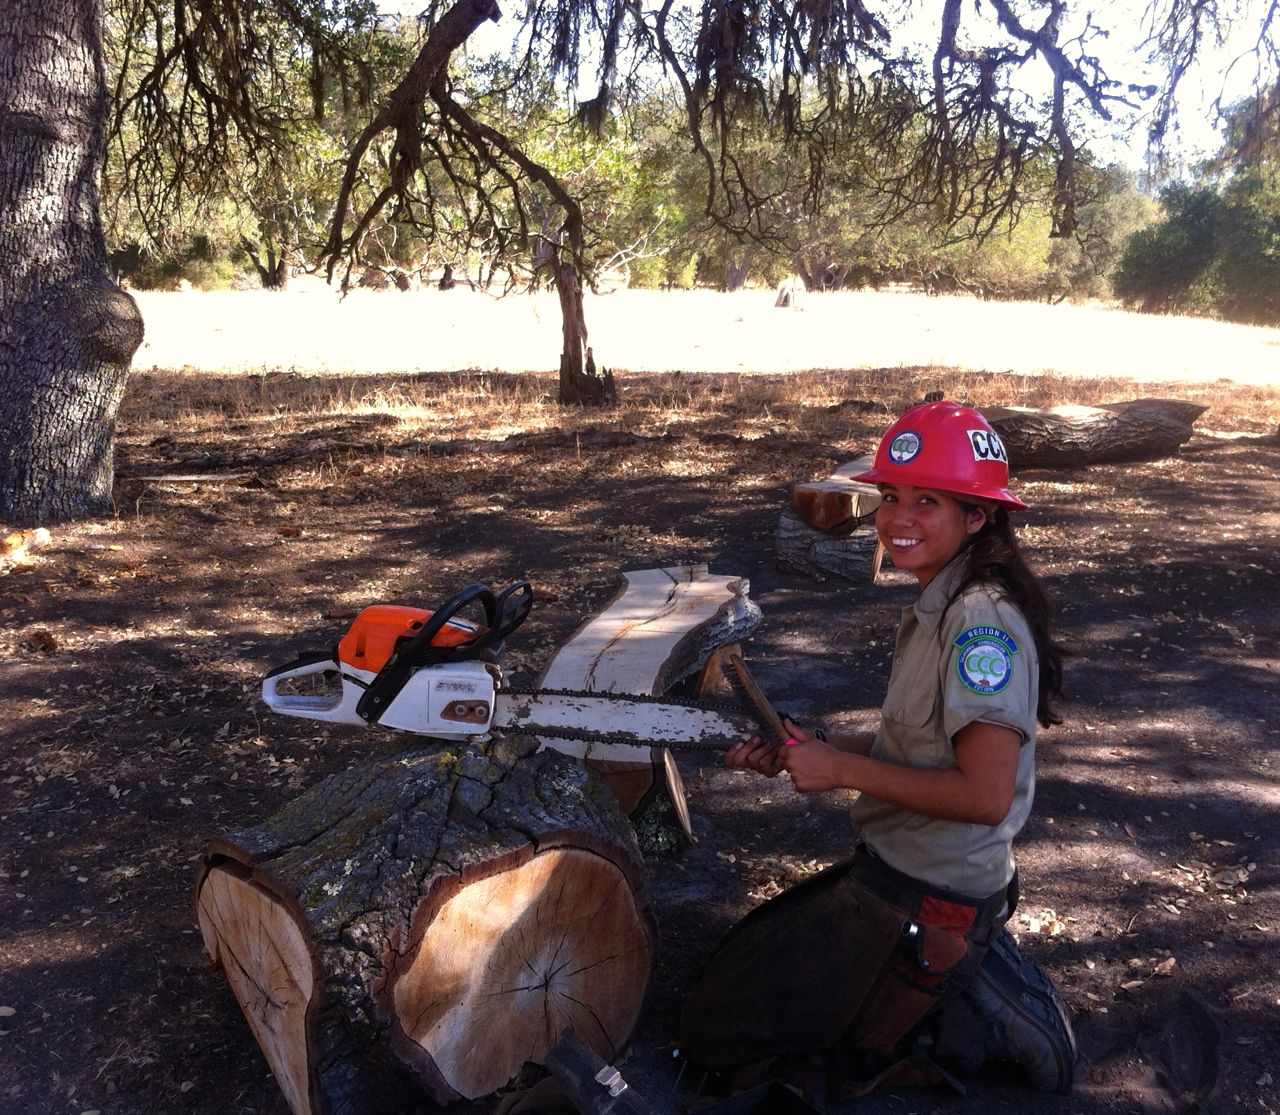 Thanks to California Conservation Corps!